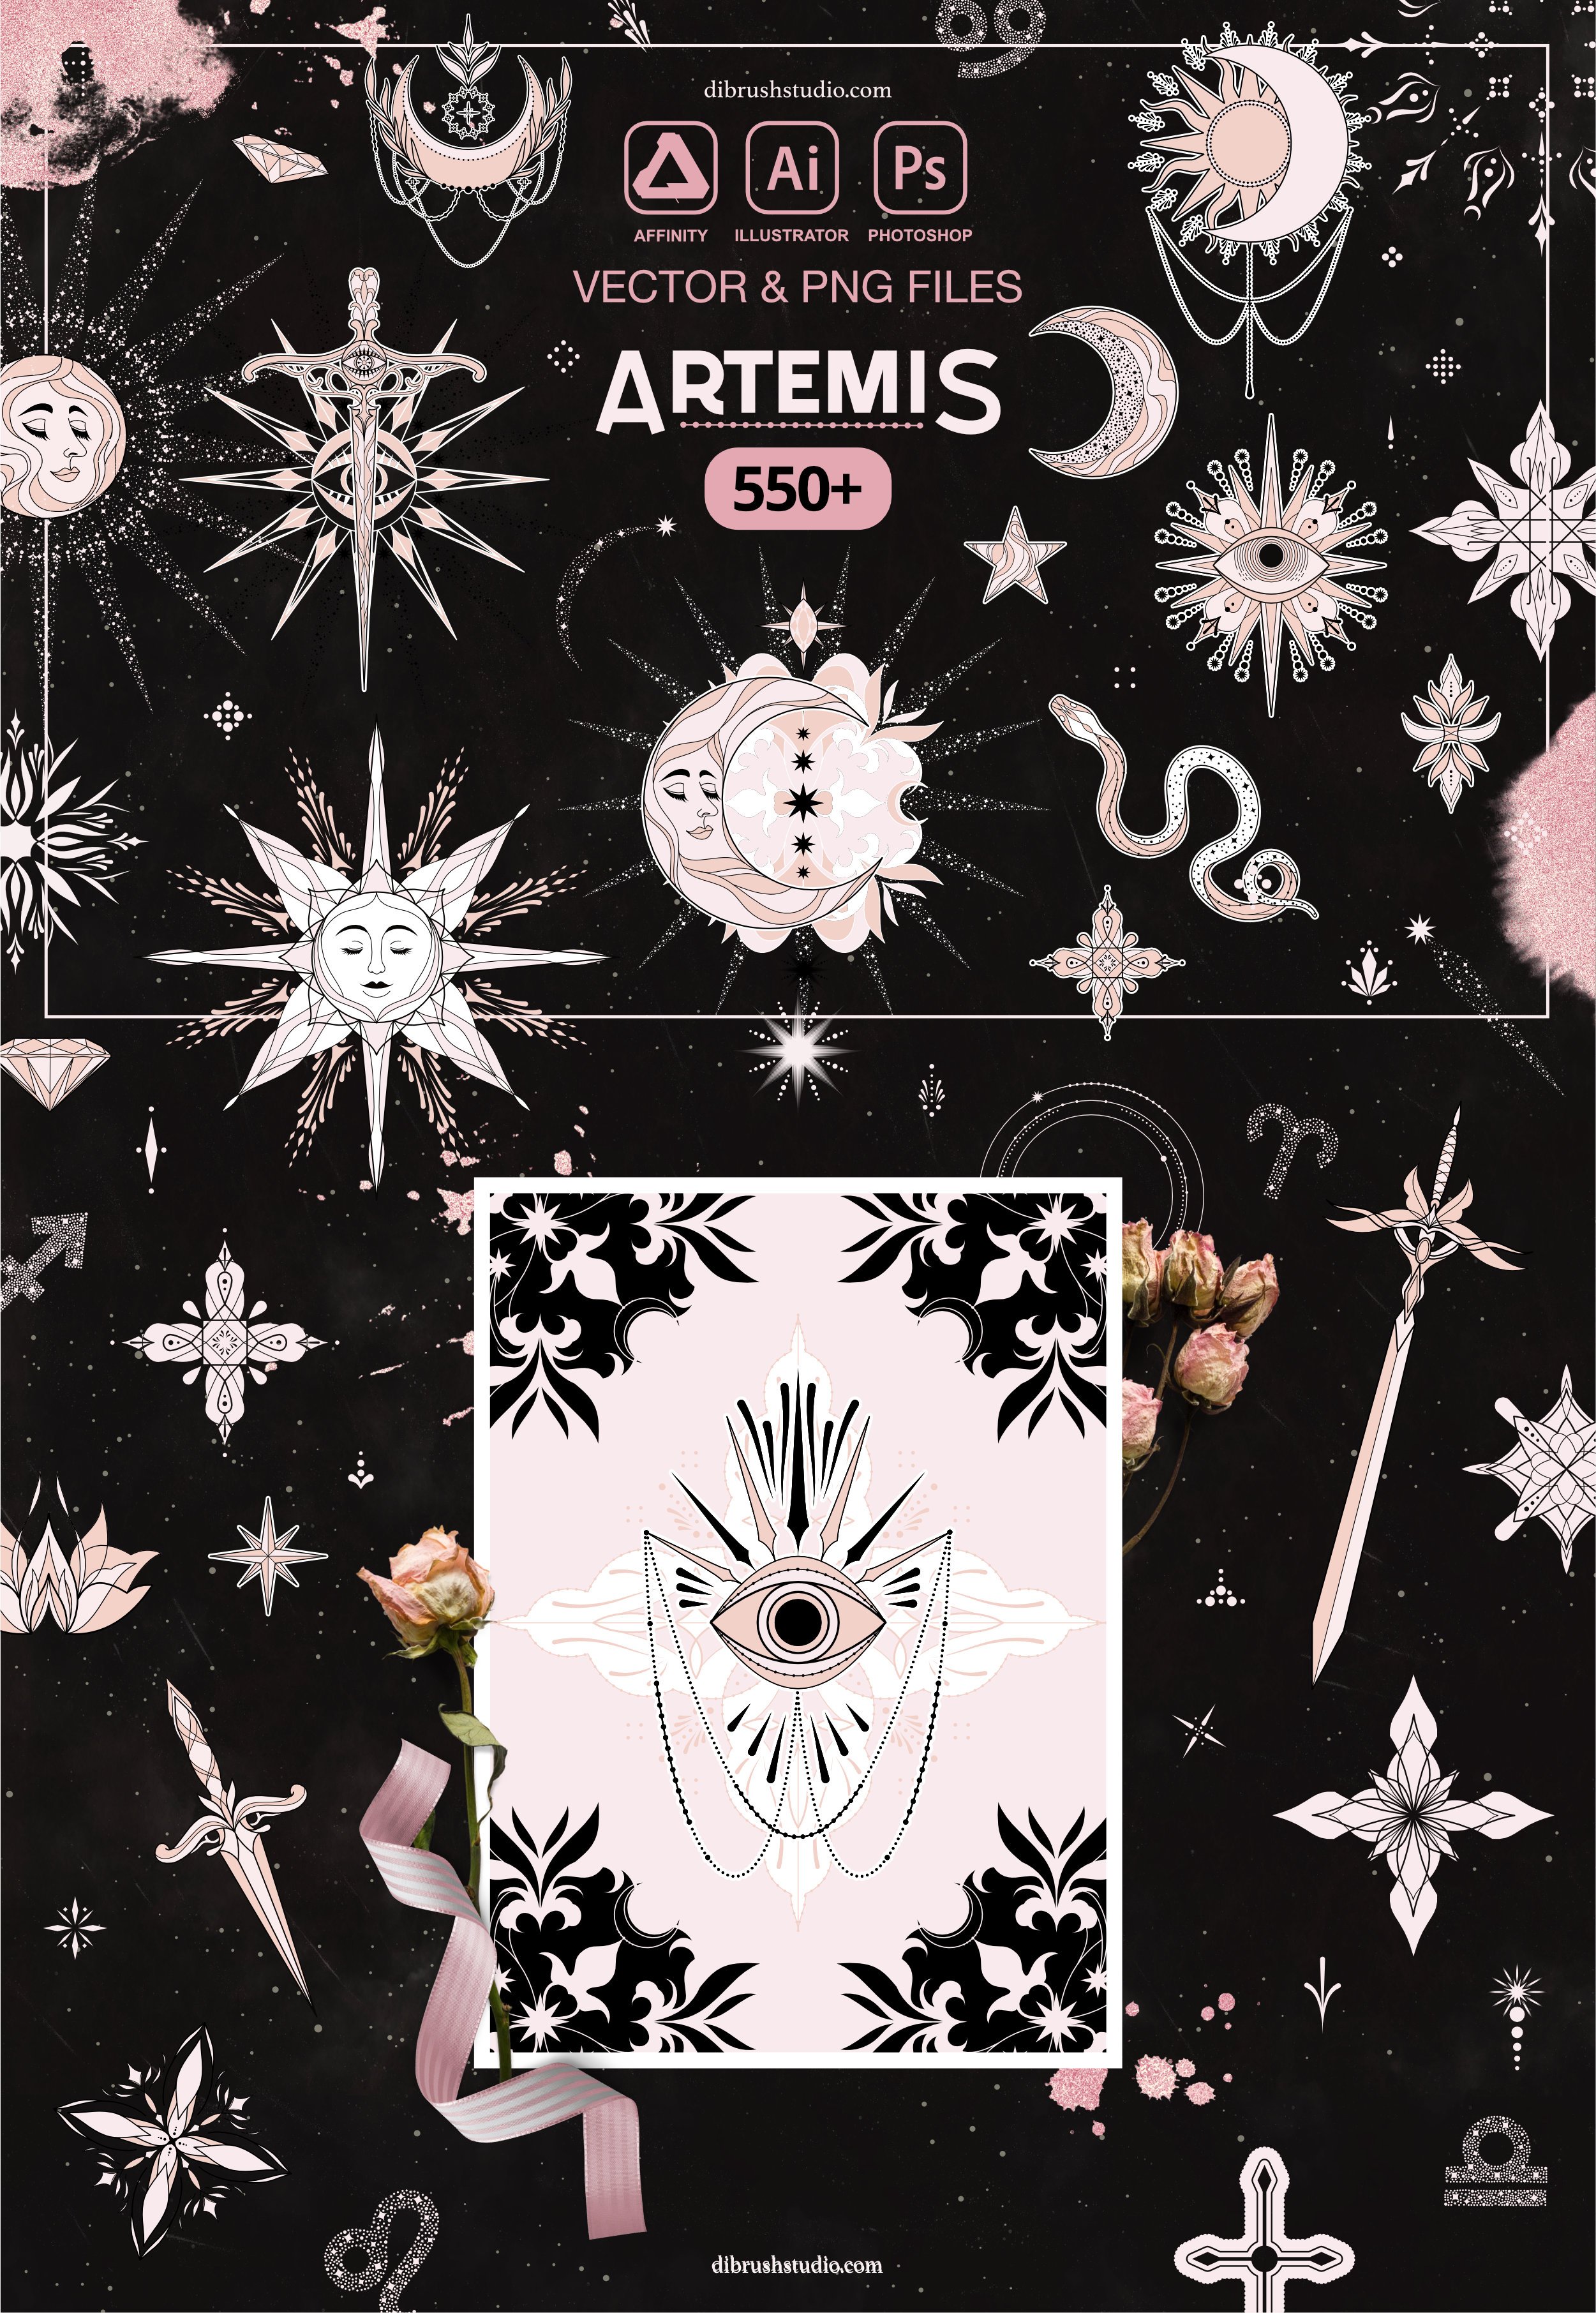 Artemis - ClipArt & Vector Pack cover image.